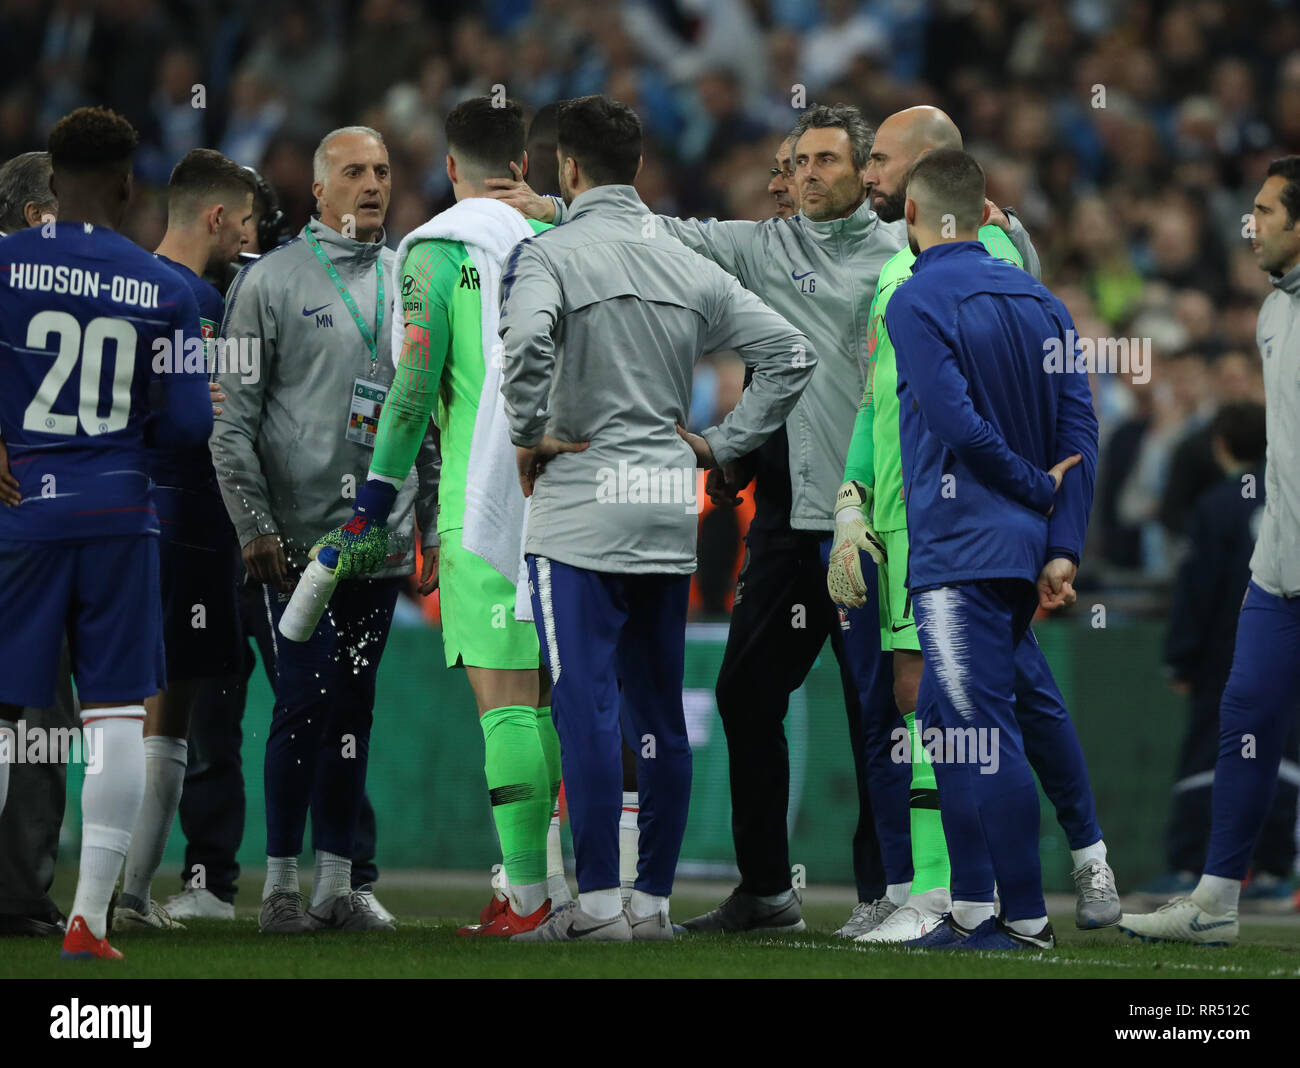 London, UK. 24th Feb, 2019. Goalkeeper Kepa Arrizabalaga (C) refused to be substituted by his manager Maurizio Sarri (Chelsea manager), as he wanted to put Willy Caballero (C) on, during the Carabao Cup Final, Chelsea v Manchester City, at Wembley Stadium, London, UK on February 24, 2019. **This picture is for editorial use only** Credit: Paul Marriott/Alamy Live News Stock Photo